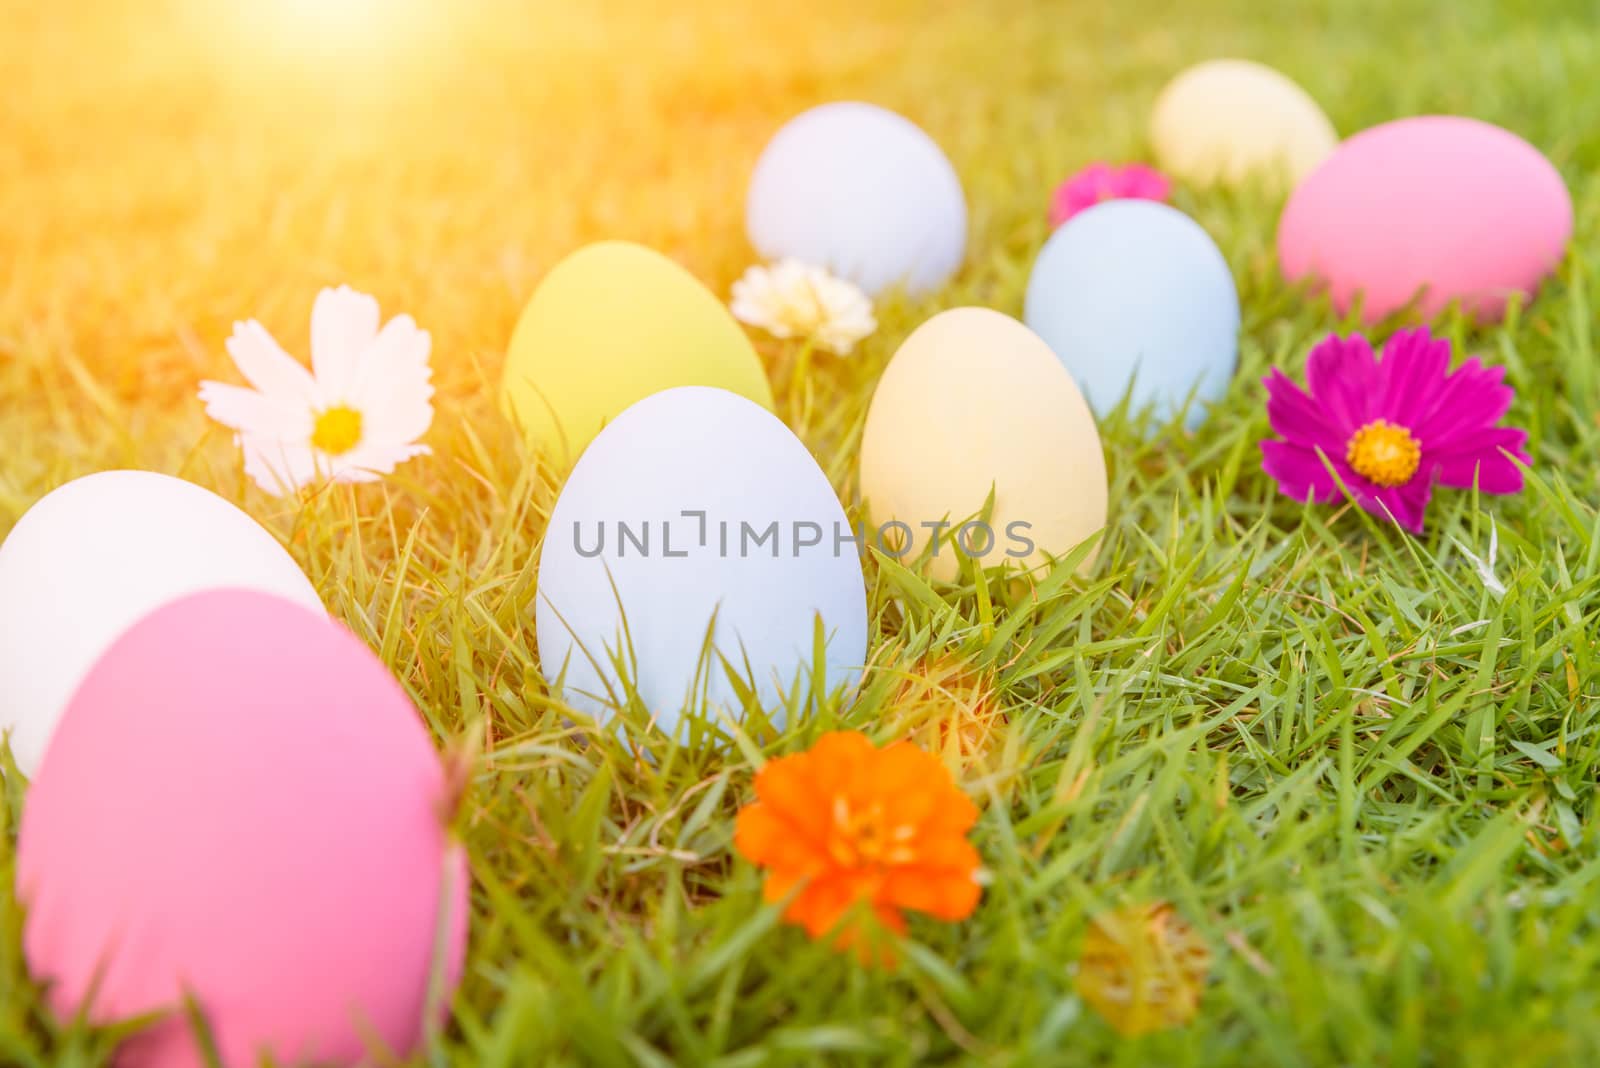 Happy easter!  Closeup Colorful Easter eggs on green grass field by spukkato